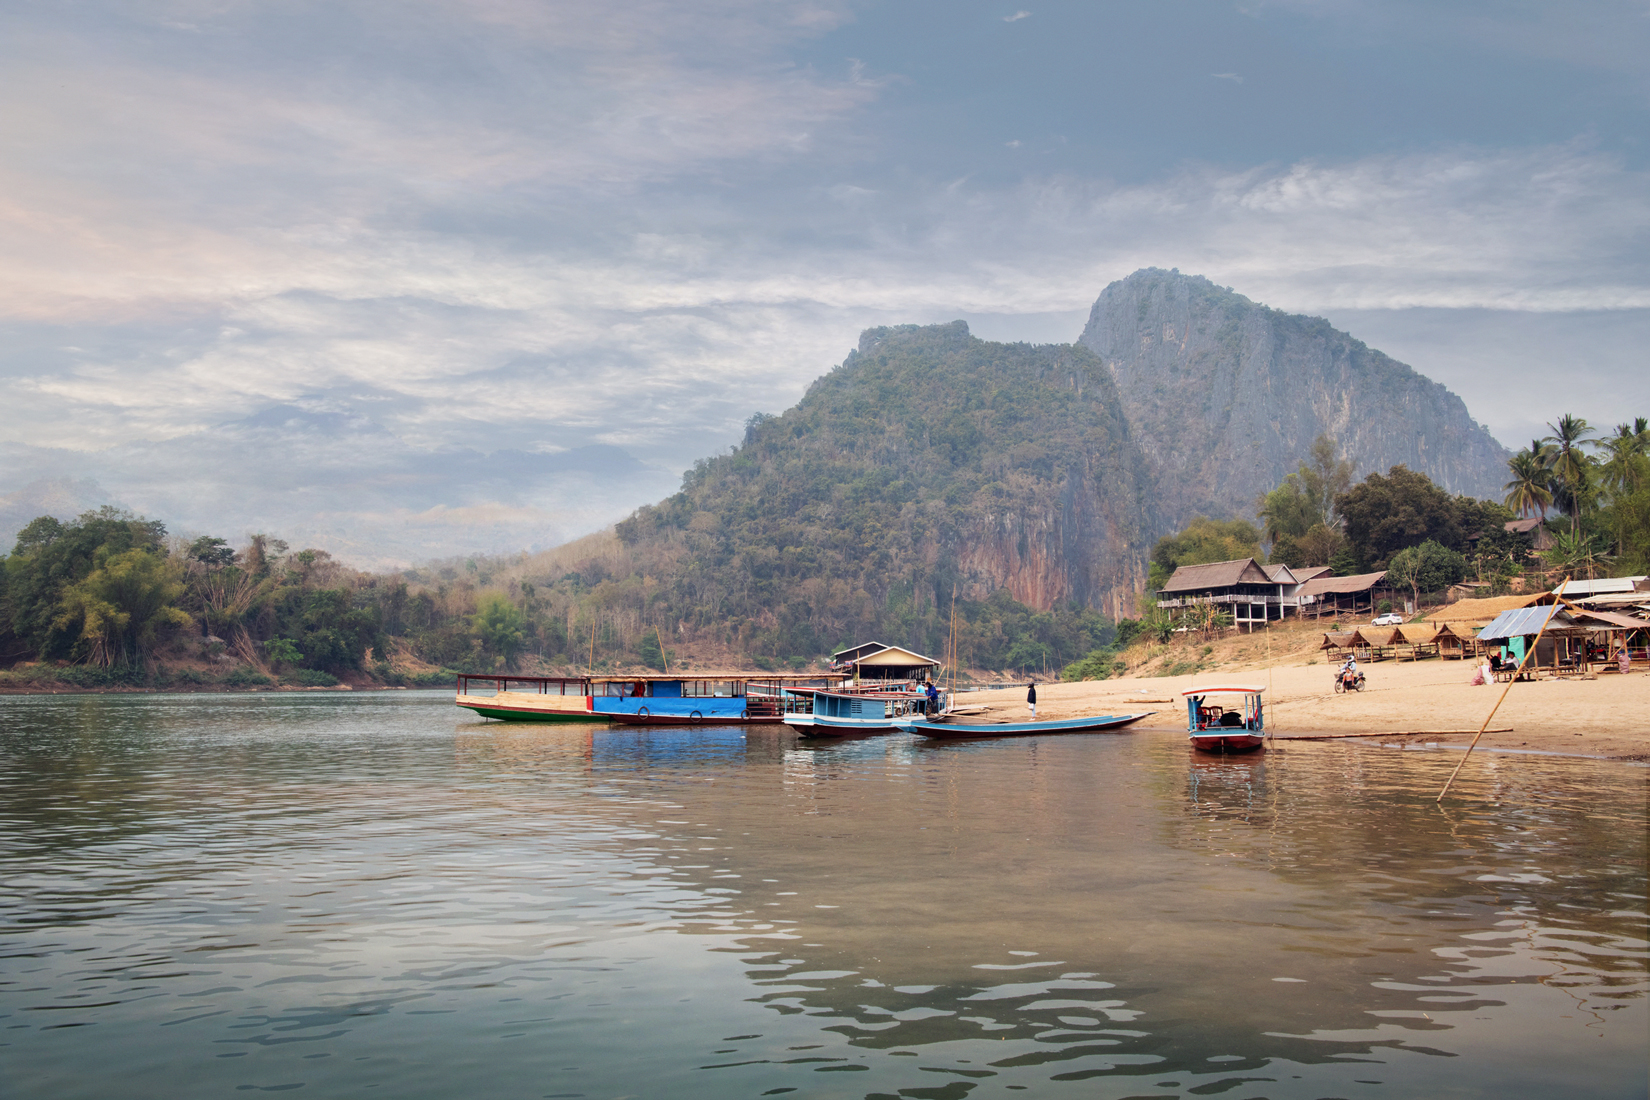 boats on a river with mountains in the background